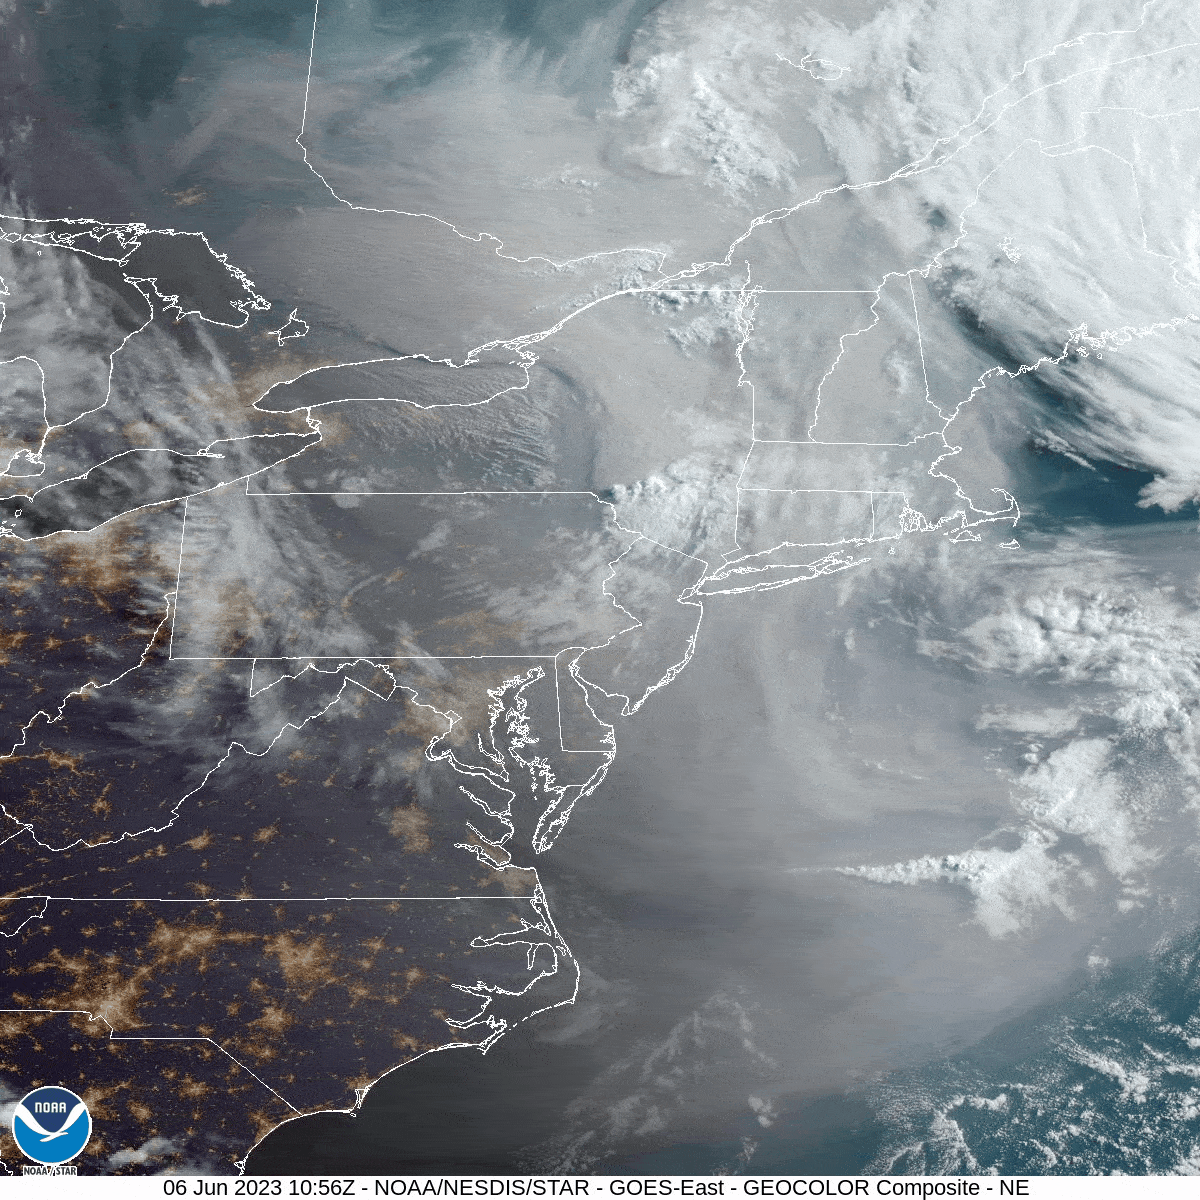 In stark contrast to the white clouds, thick grayish smoke can be seen moving over the eastern U.S. via NOAA’s GOES-16 (GOES East) satellite on June 6, 2023